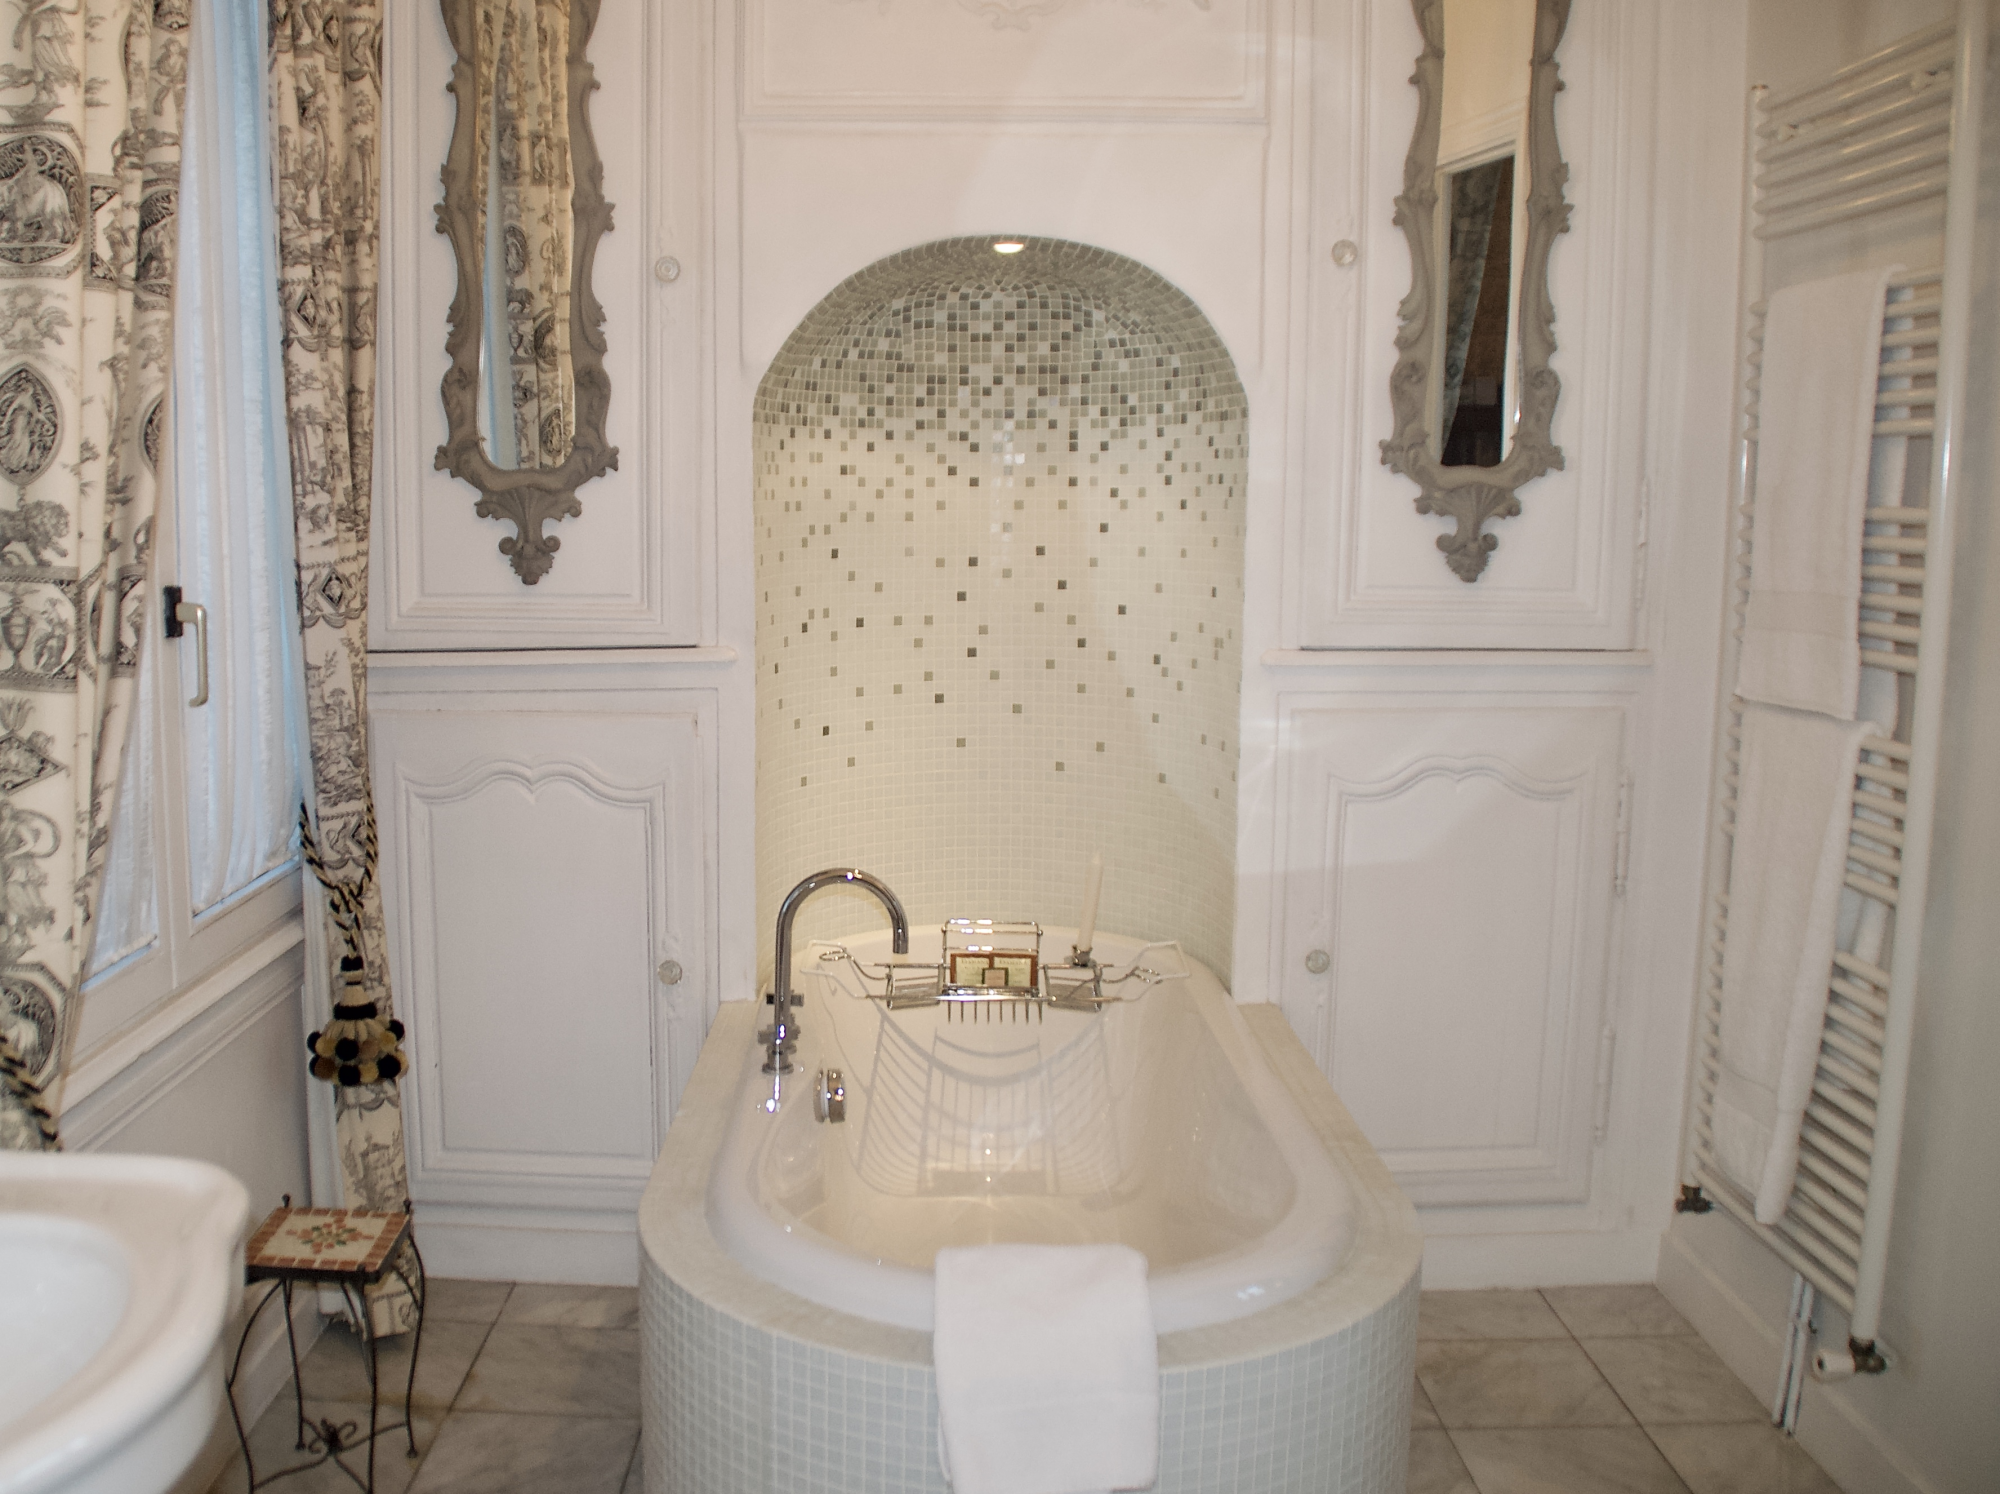 The mosaic and marble tiled bathroom in the Empire suite has a soaking tub and separate walk in shower.